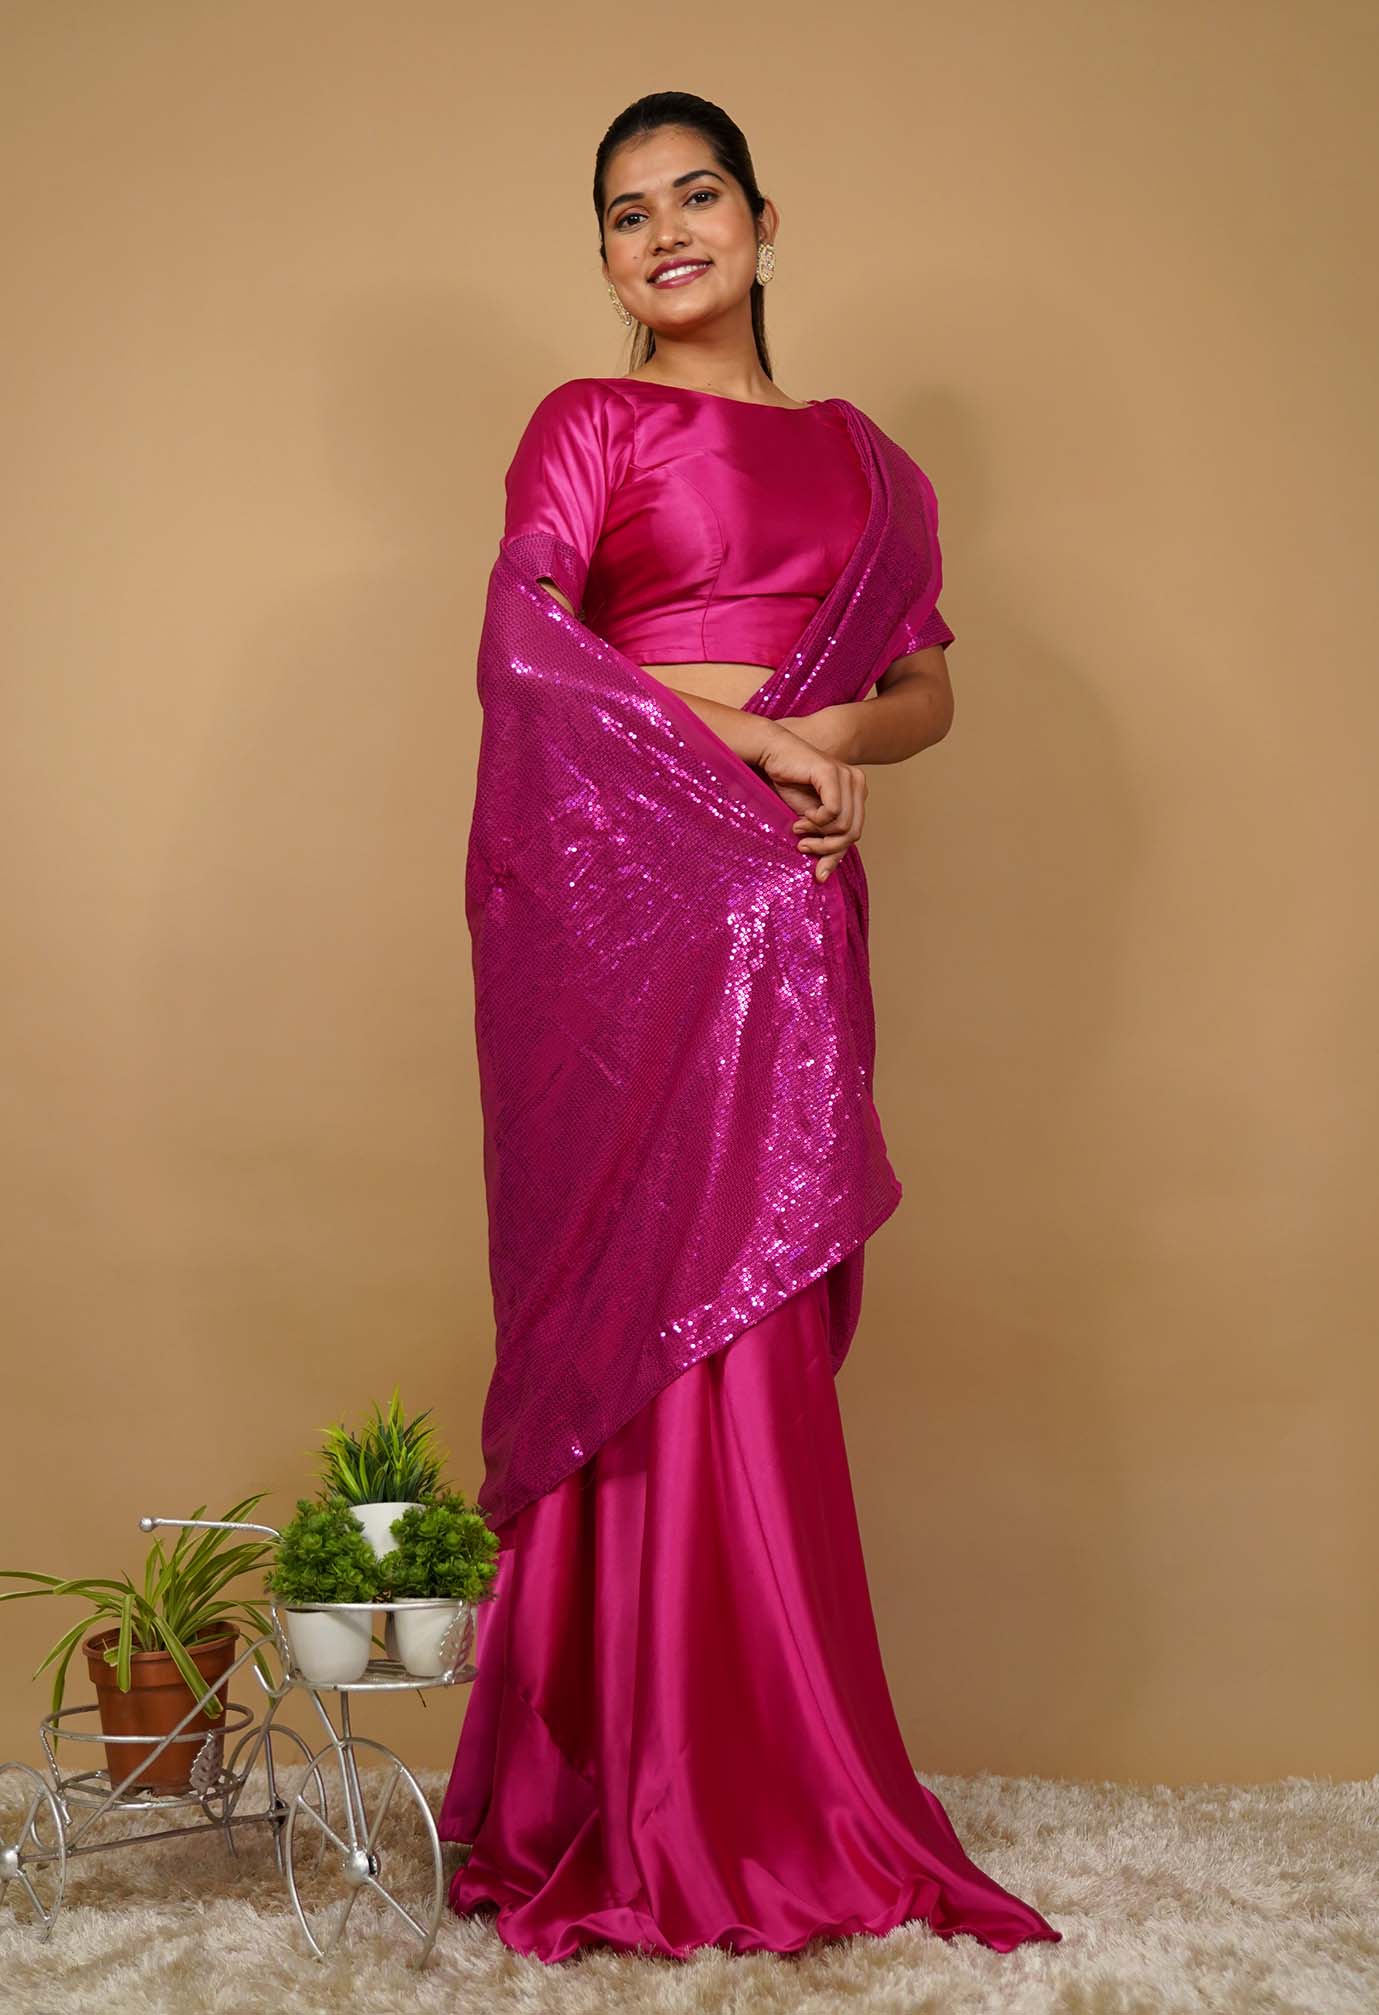 Ready To Wear Cowl Drapped With Belt And skirt patterned Designer Saree